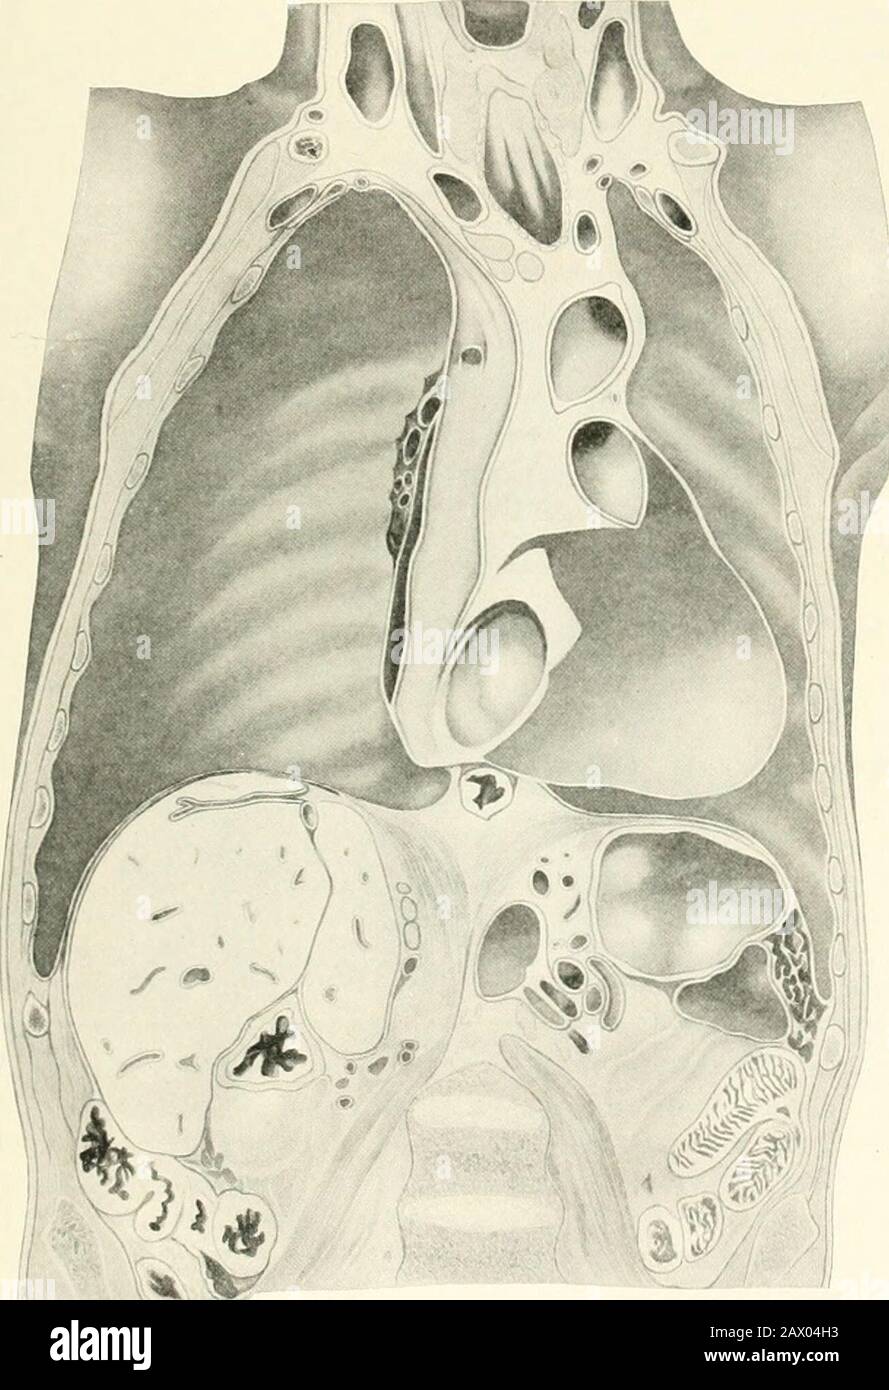 Clinical tuberculosis . I.-ig  55 —Position of tlie dinpiirngni .in&lt;l intrathoracic and abdominal organs in adult36 years of age. Cotiiiiare with Figs. 54 and 56. (Mehnert.). Fig. 56.—Position of tlit- diaplnagm and the intialhoi aeic and abdominal organs in adult11 years of age. Compare with Figs. 54 and 55. (Mehnert.) Stock Photo